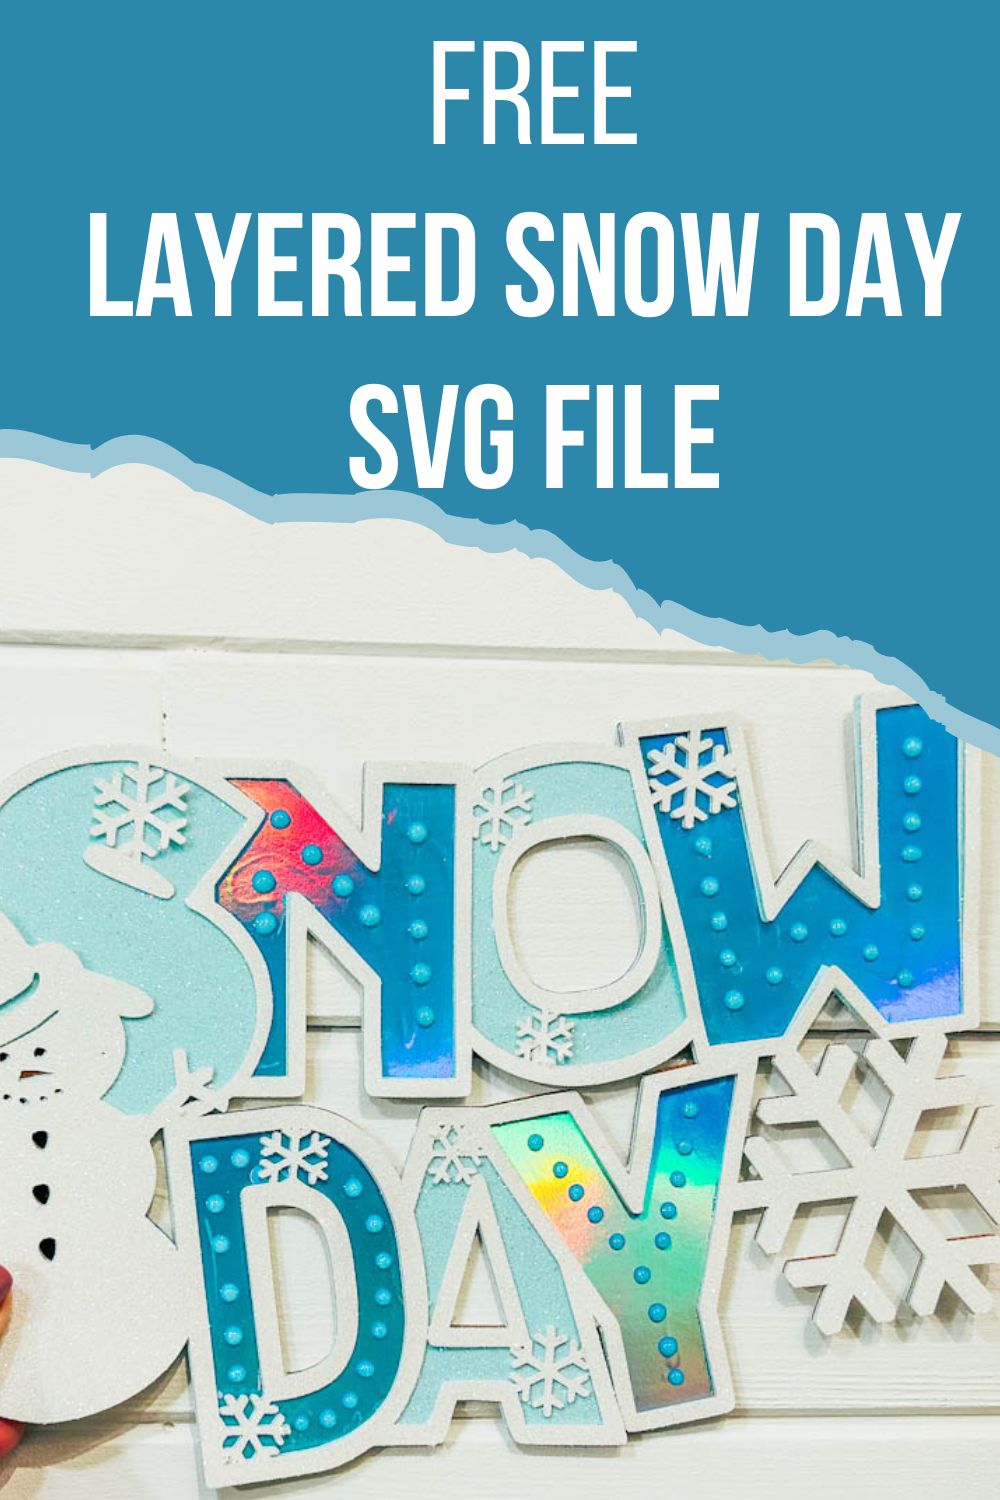 Free Layered Snow Day SVG file for Cricut and Silhouette